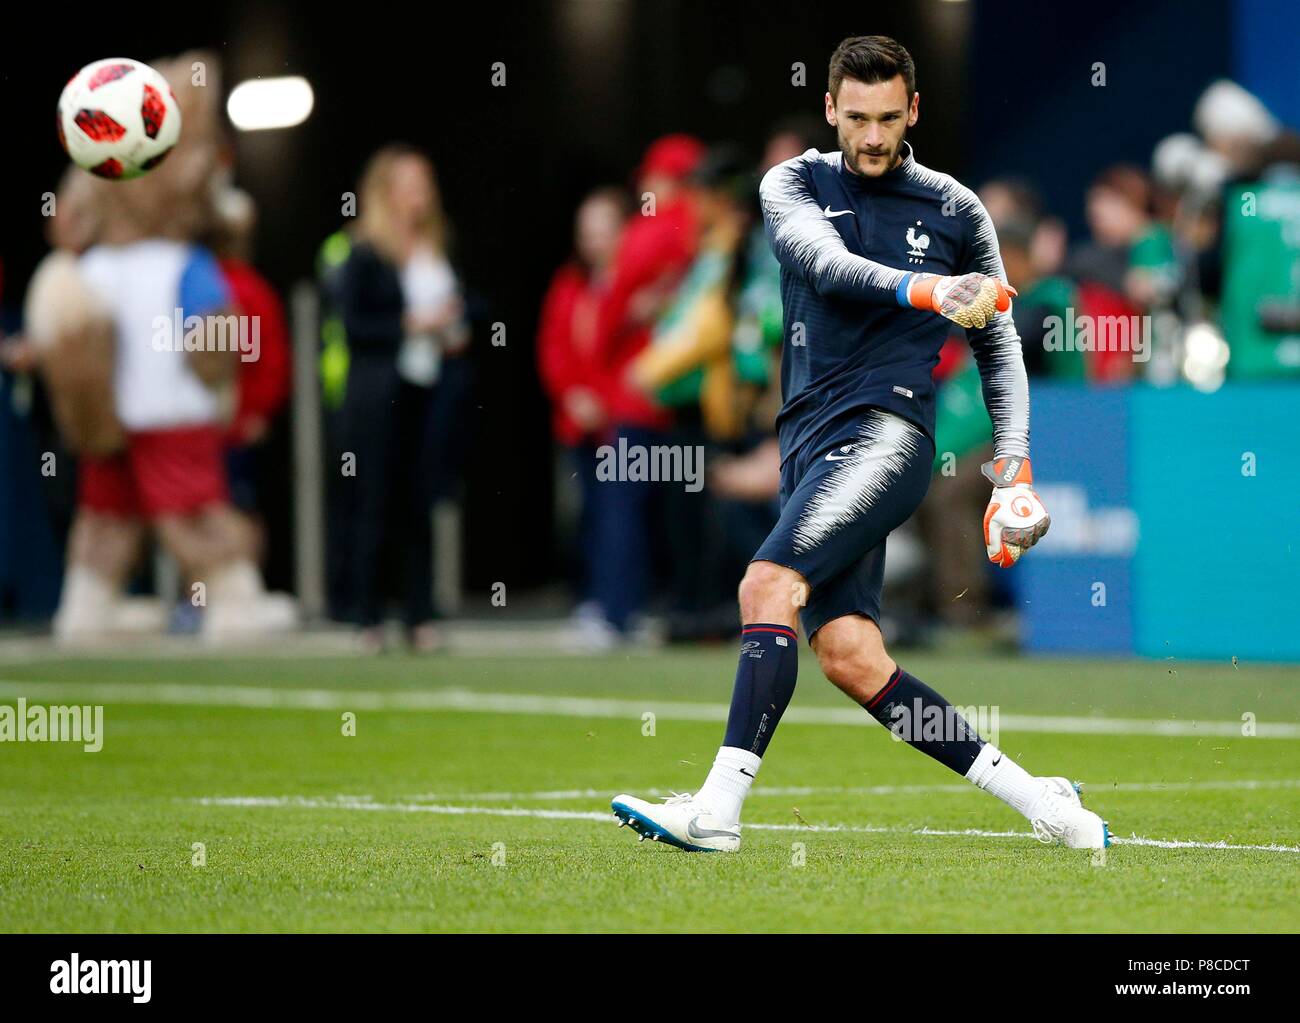 St Petersburg, Russia. 10th July, 2018. Hugo Lloris of France warms up before the 2018 FIFA World Cup Semi Final match between France and Belgium at Saint Petersburg Stadium on July 10th 2018 in Saint Petersburg, Russia. (Photo by Daniel Chesterton/phcimages.com) Credit: PHC Images/Alamy Live News Stock Photo